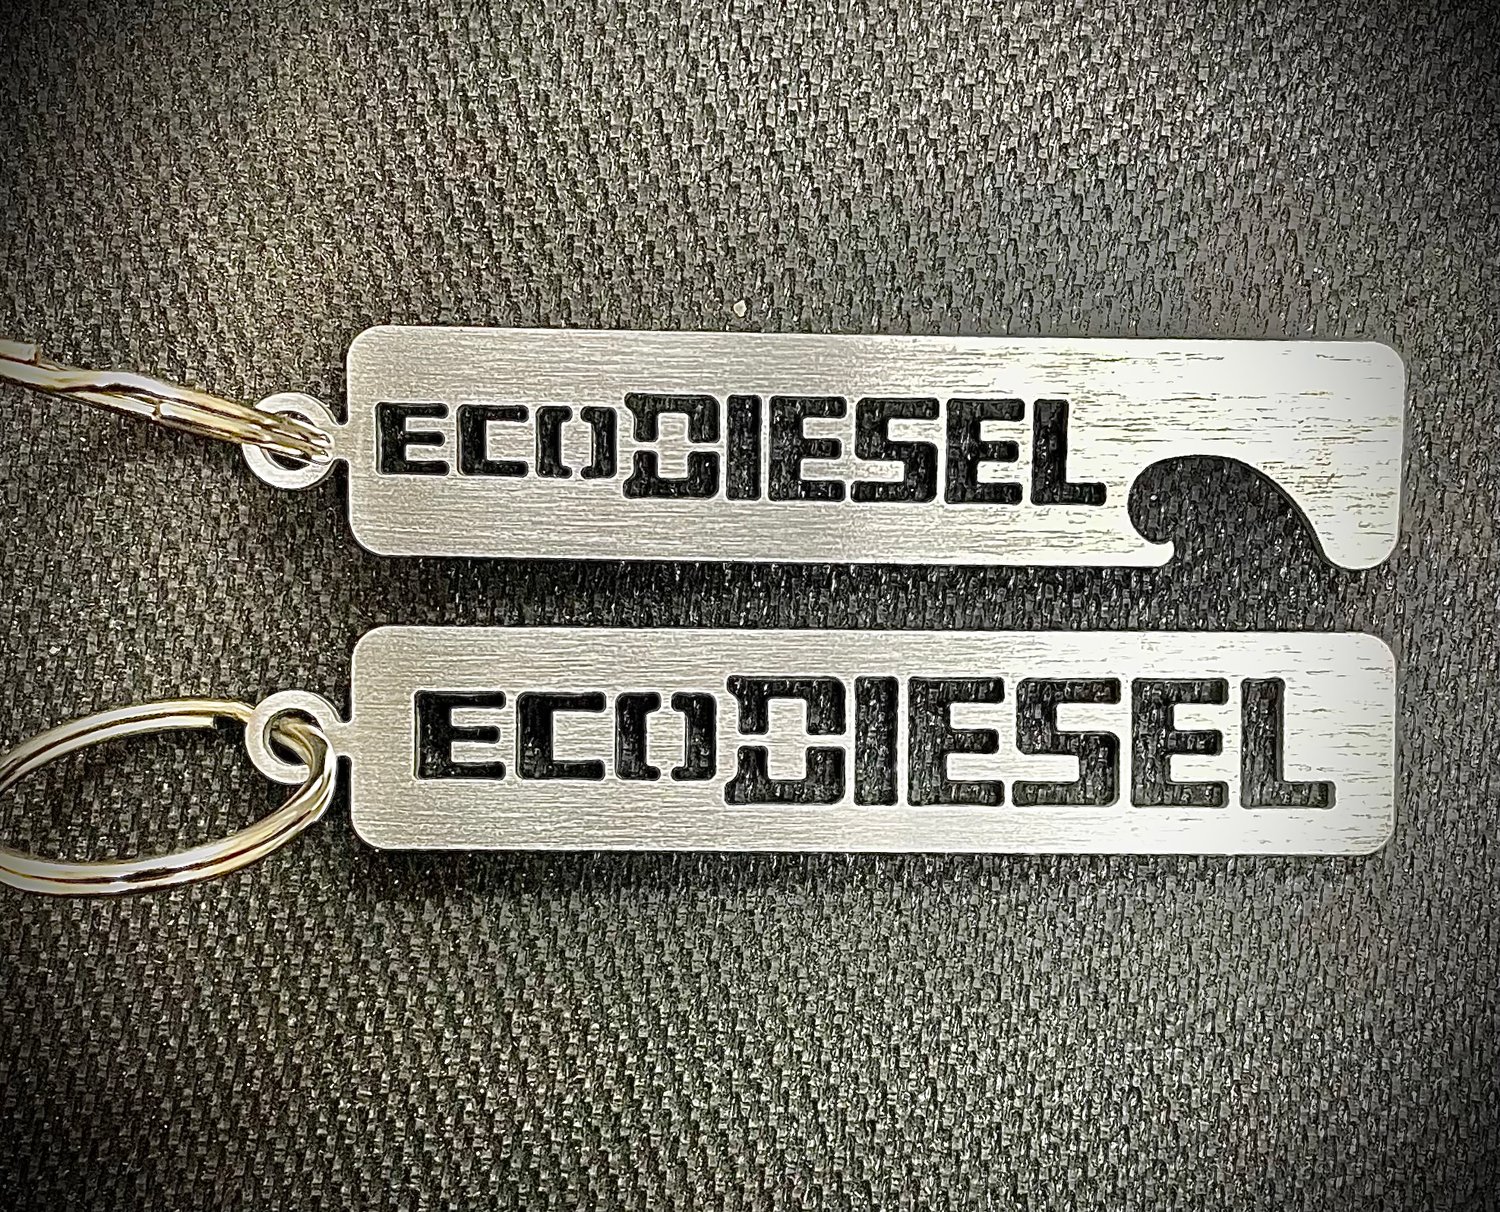 For Eco Diesel Enthusiasts 